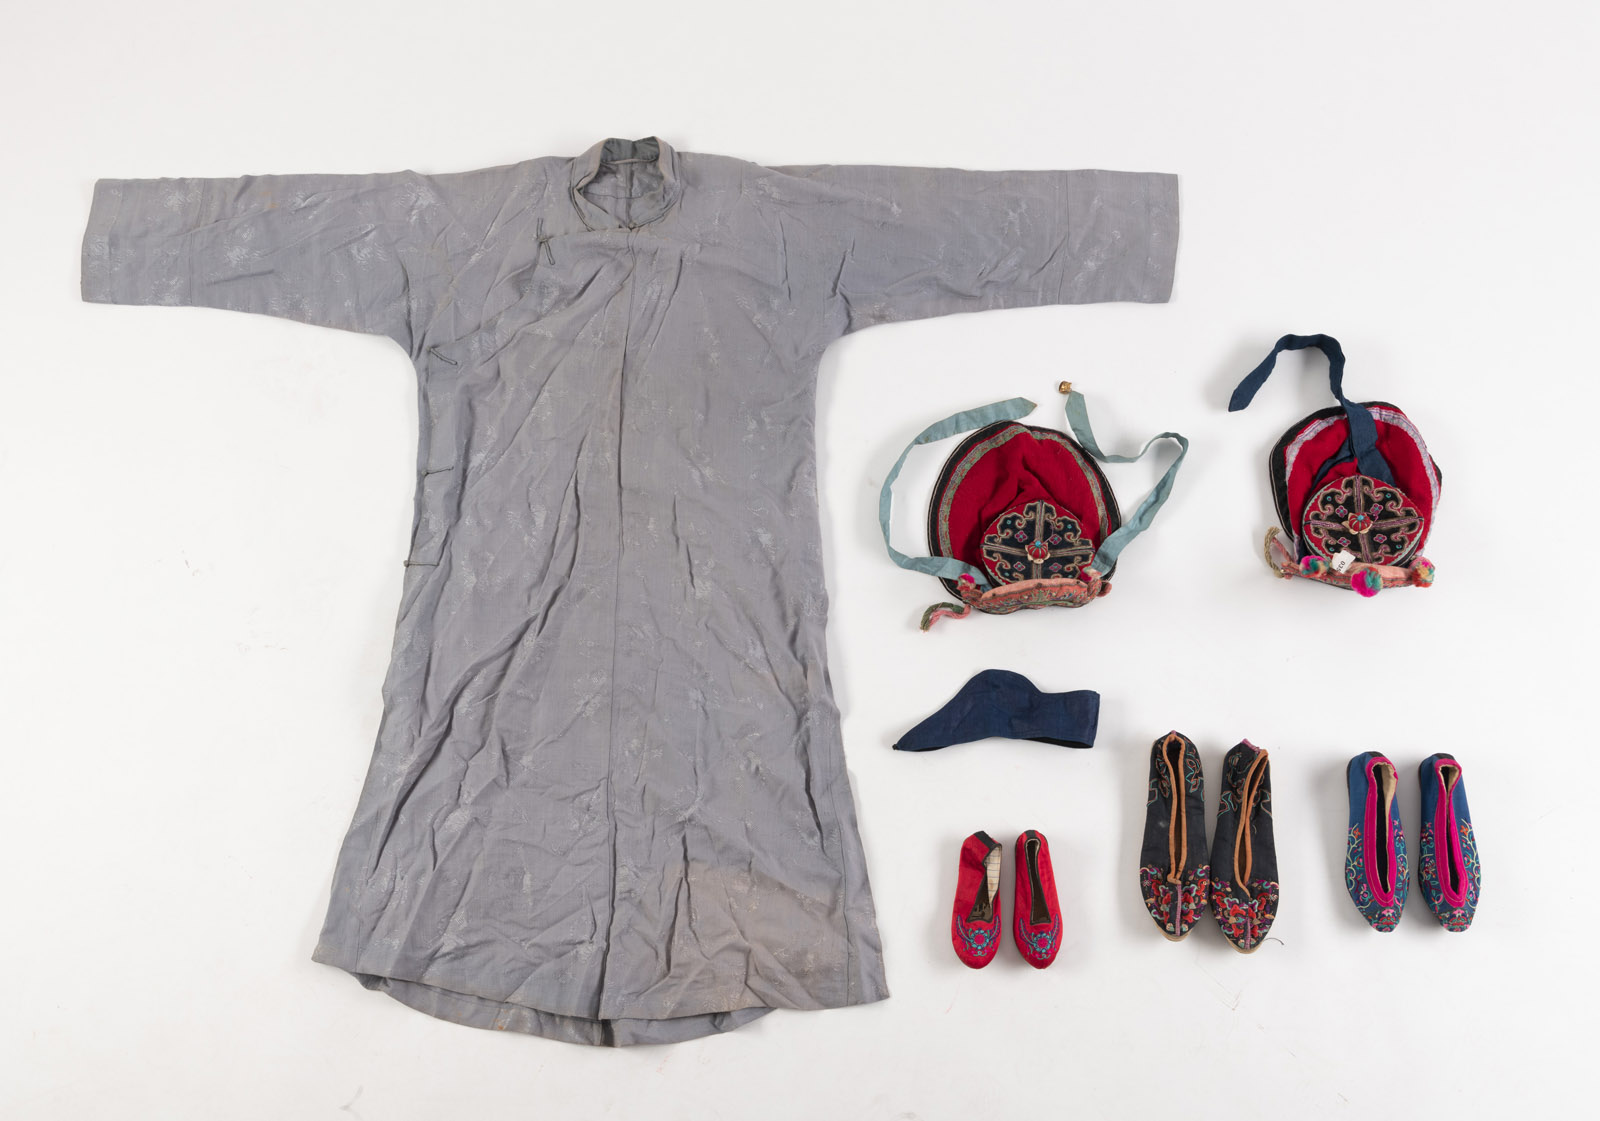 <b>LOT OF TEXTILES: TWO CHILDREN'S HOODS, THREE PAIRS OF SHOES, A SUMMER ROBE AND A HEADBAND</b>